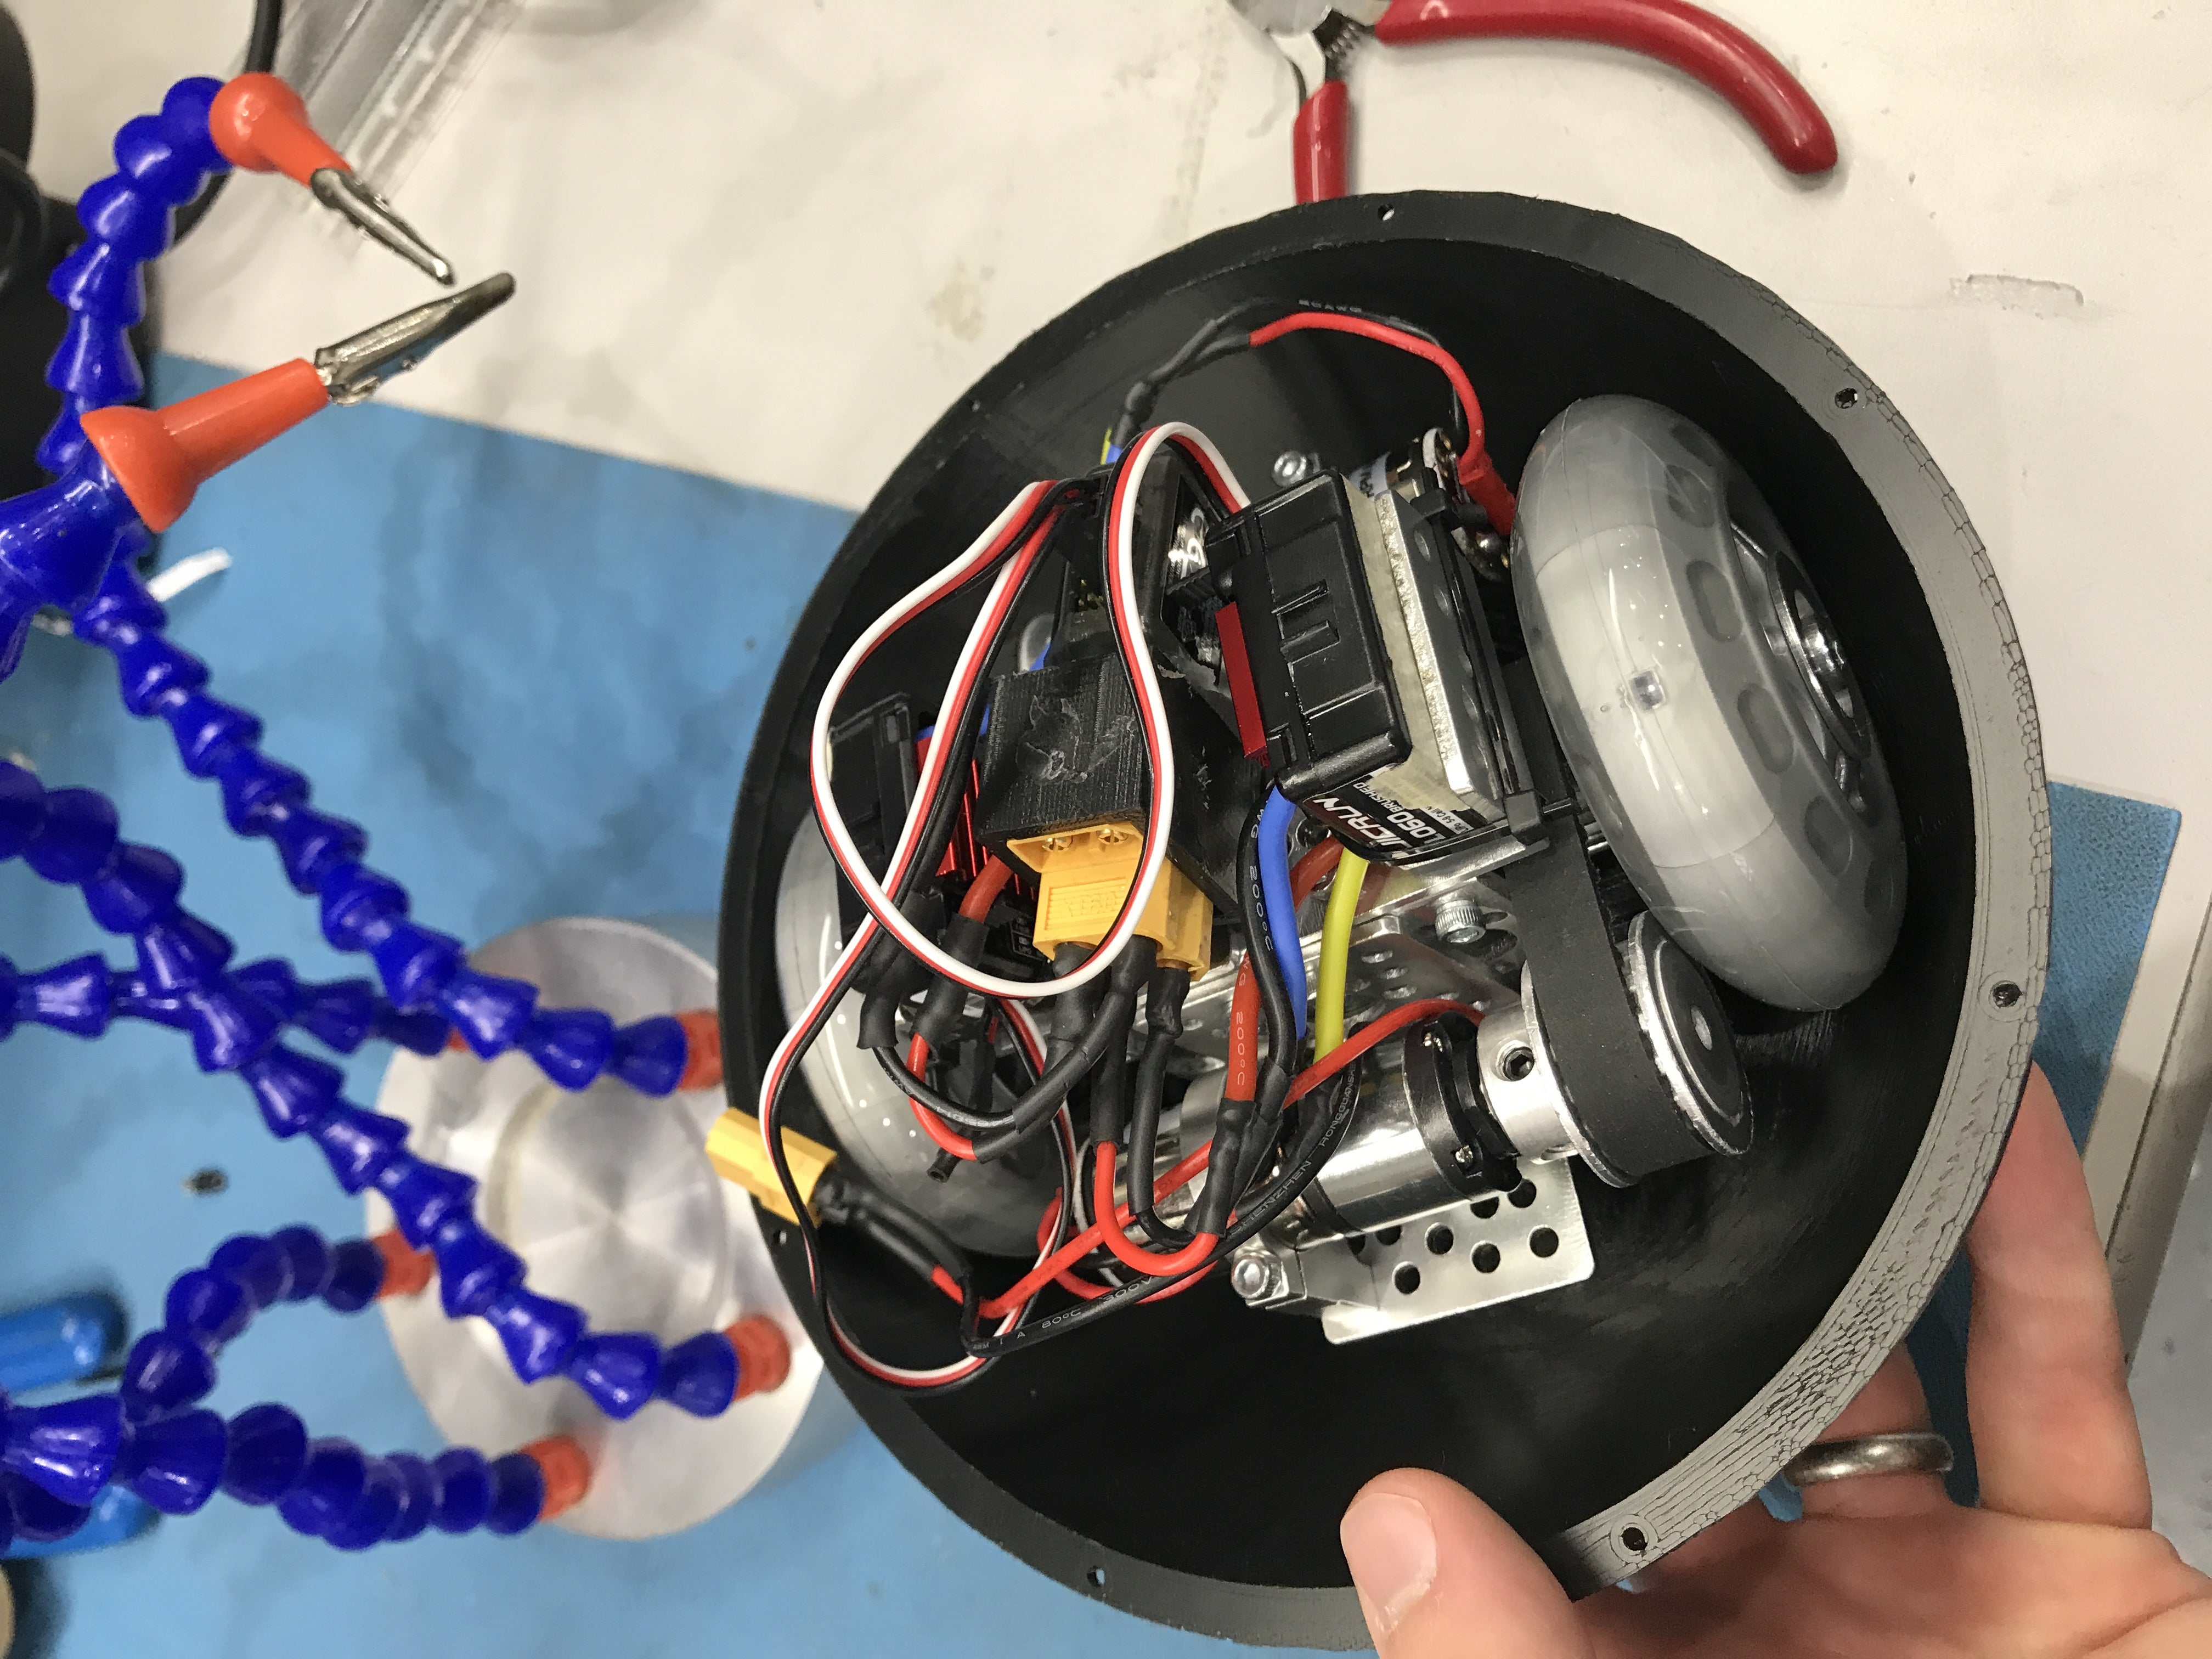 Hnds holds shell of spherical robot, filled with electronics